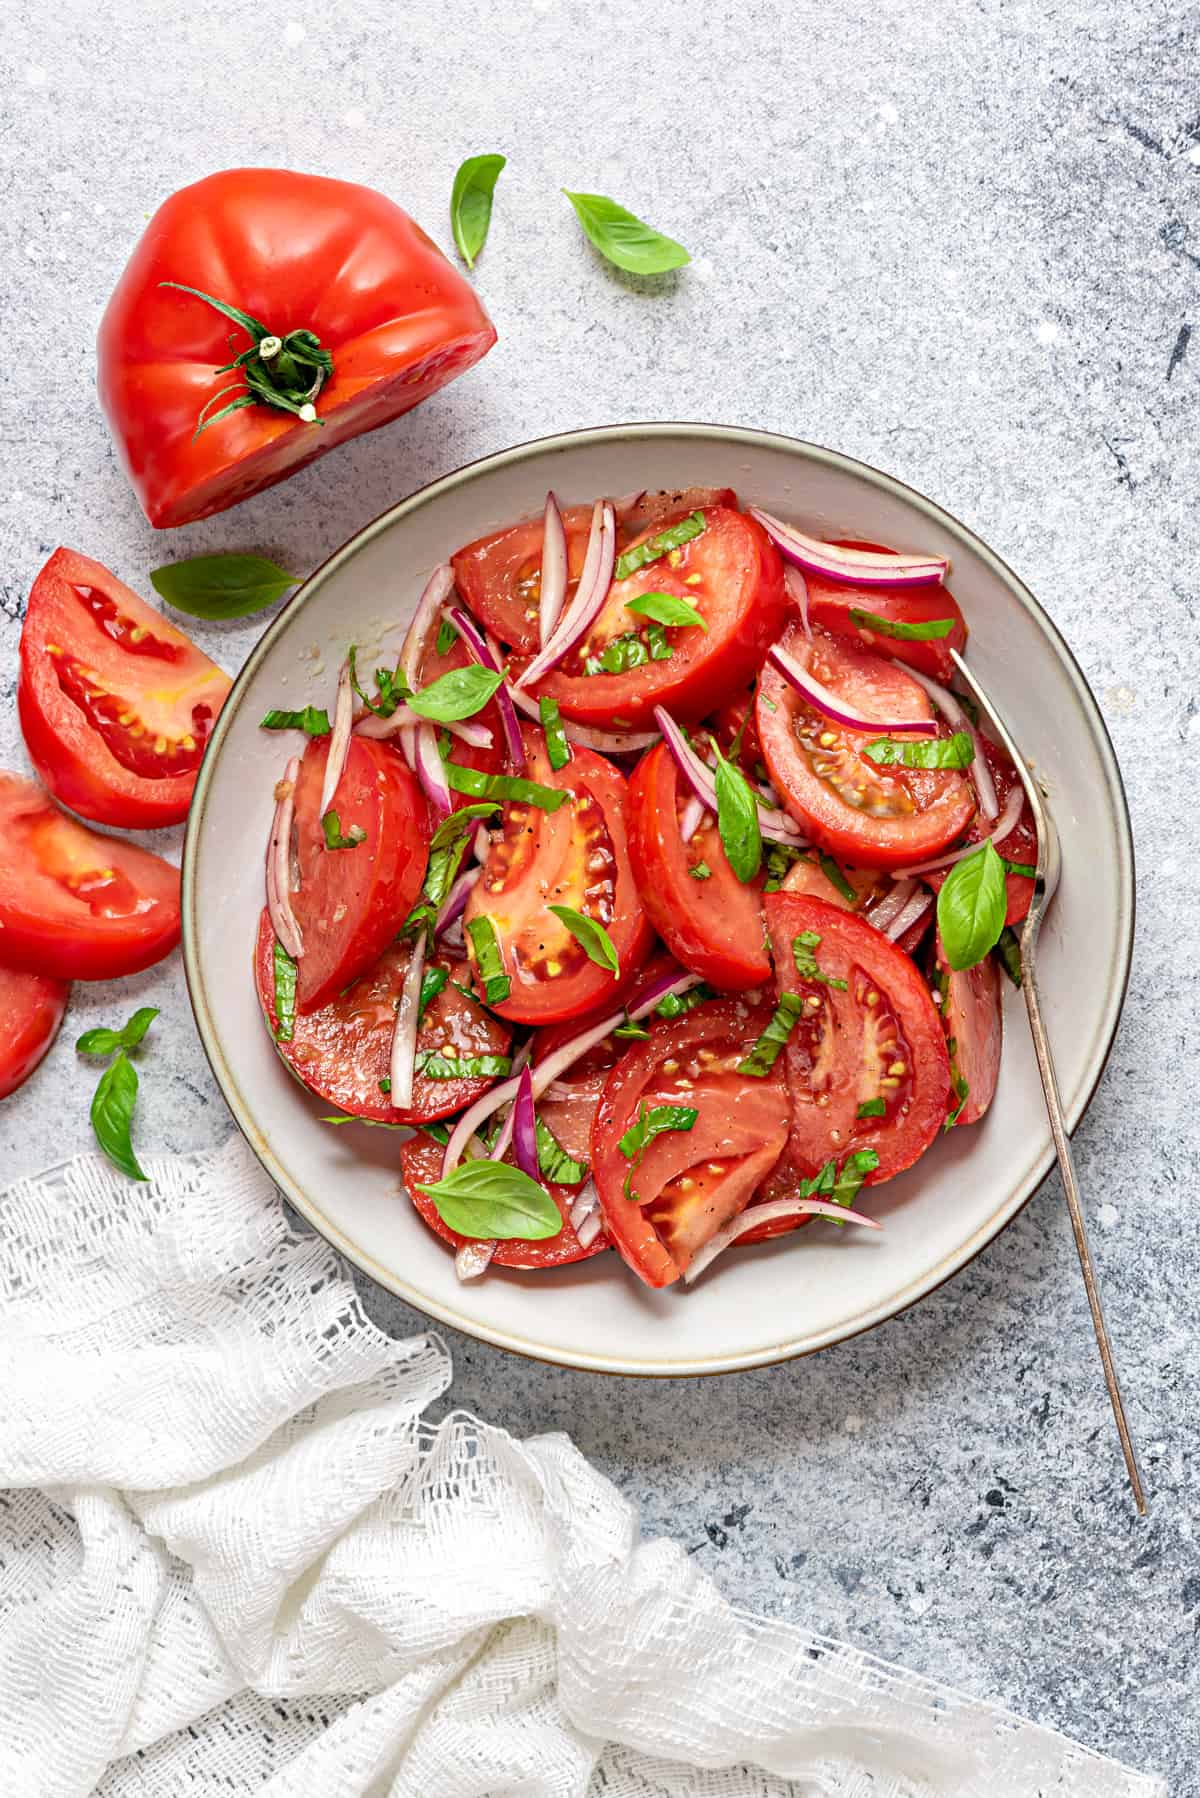 Tomato basil salad served in a grey ceramic plate with a fork, and napkin on side.